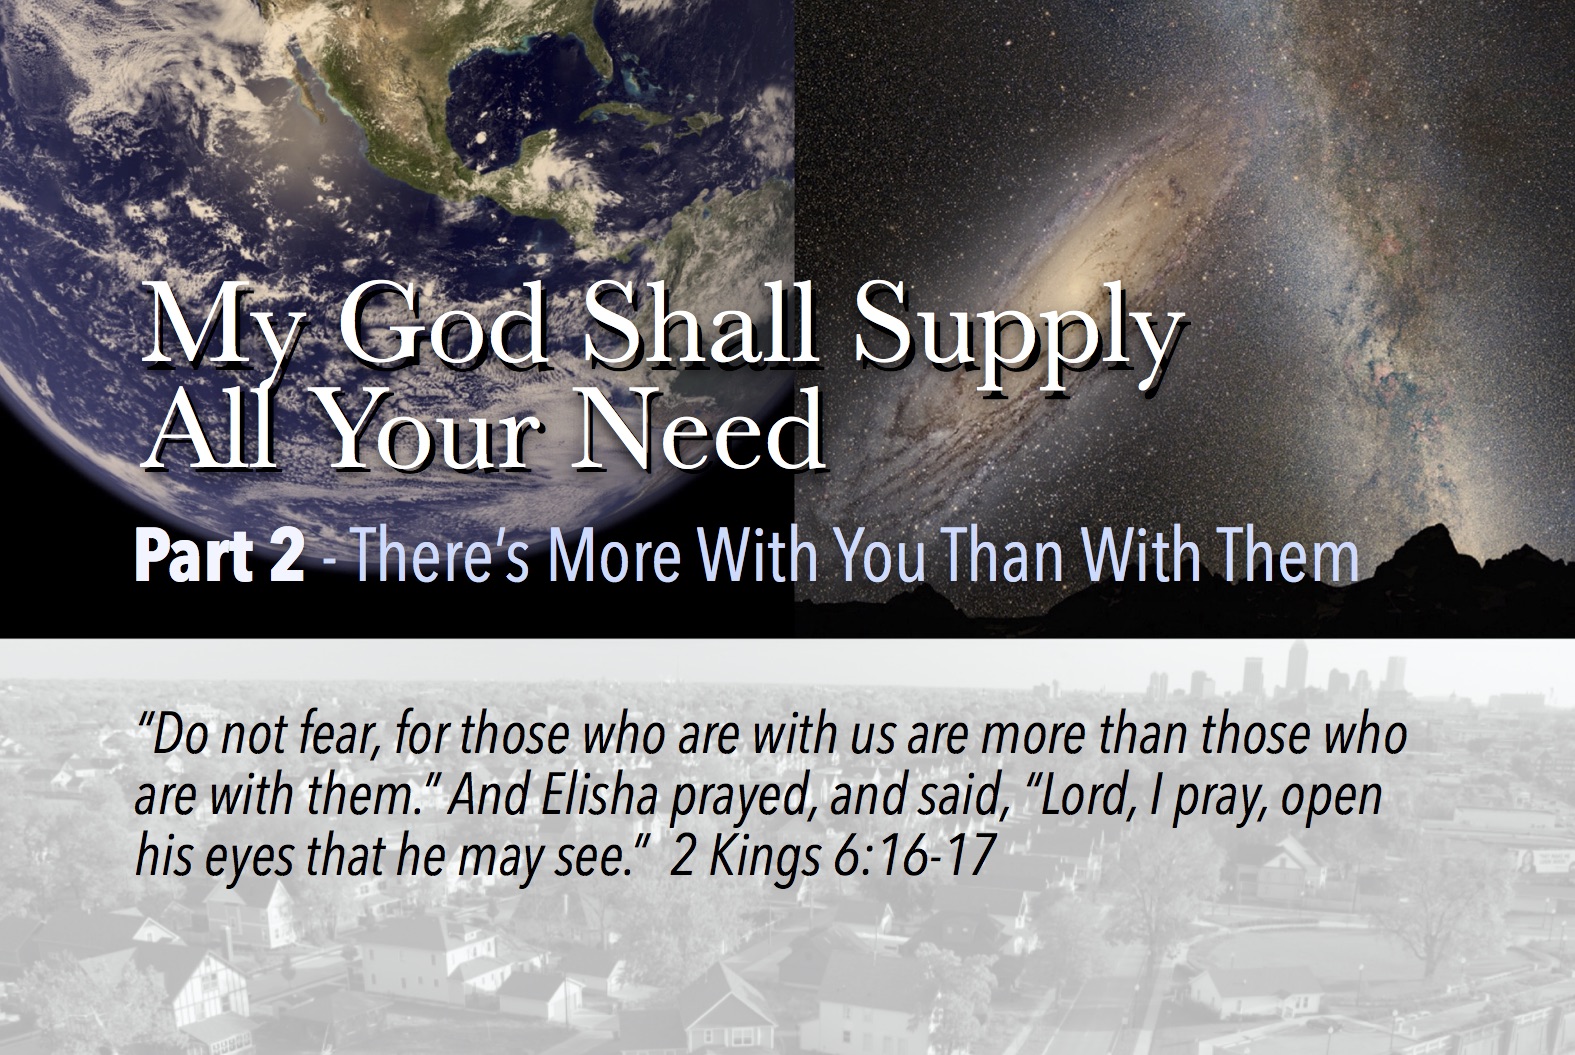 My God Shall Supply All Your Need - Part 2, 